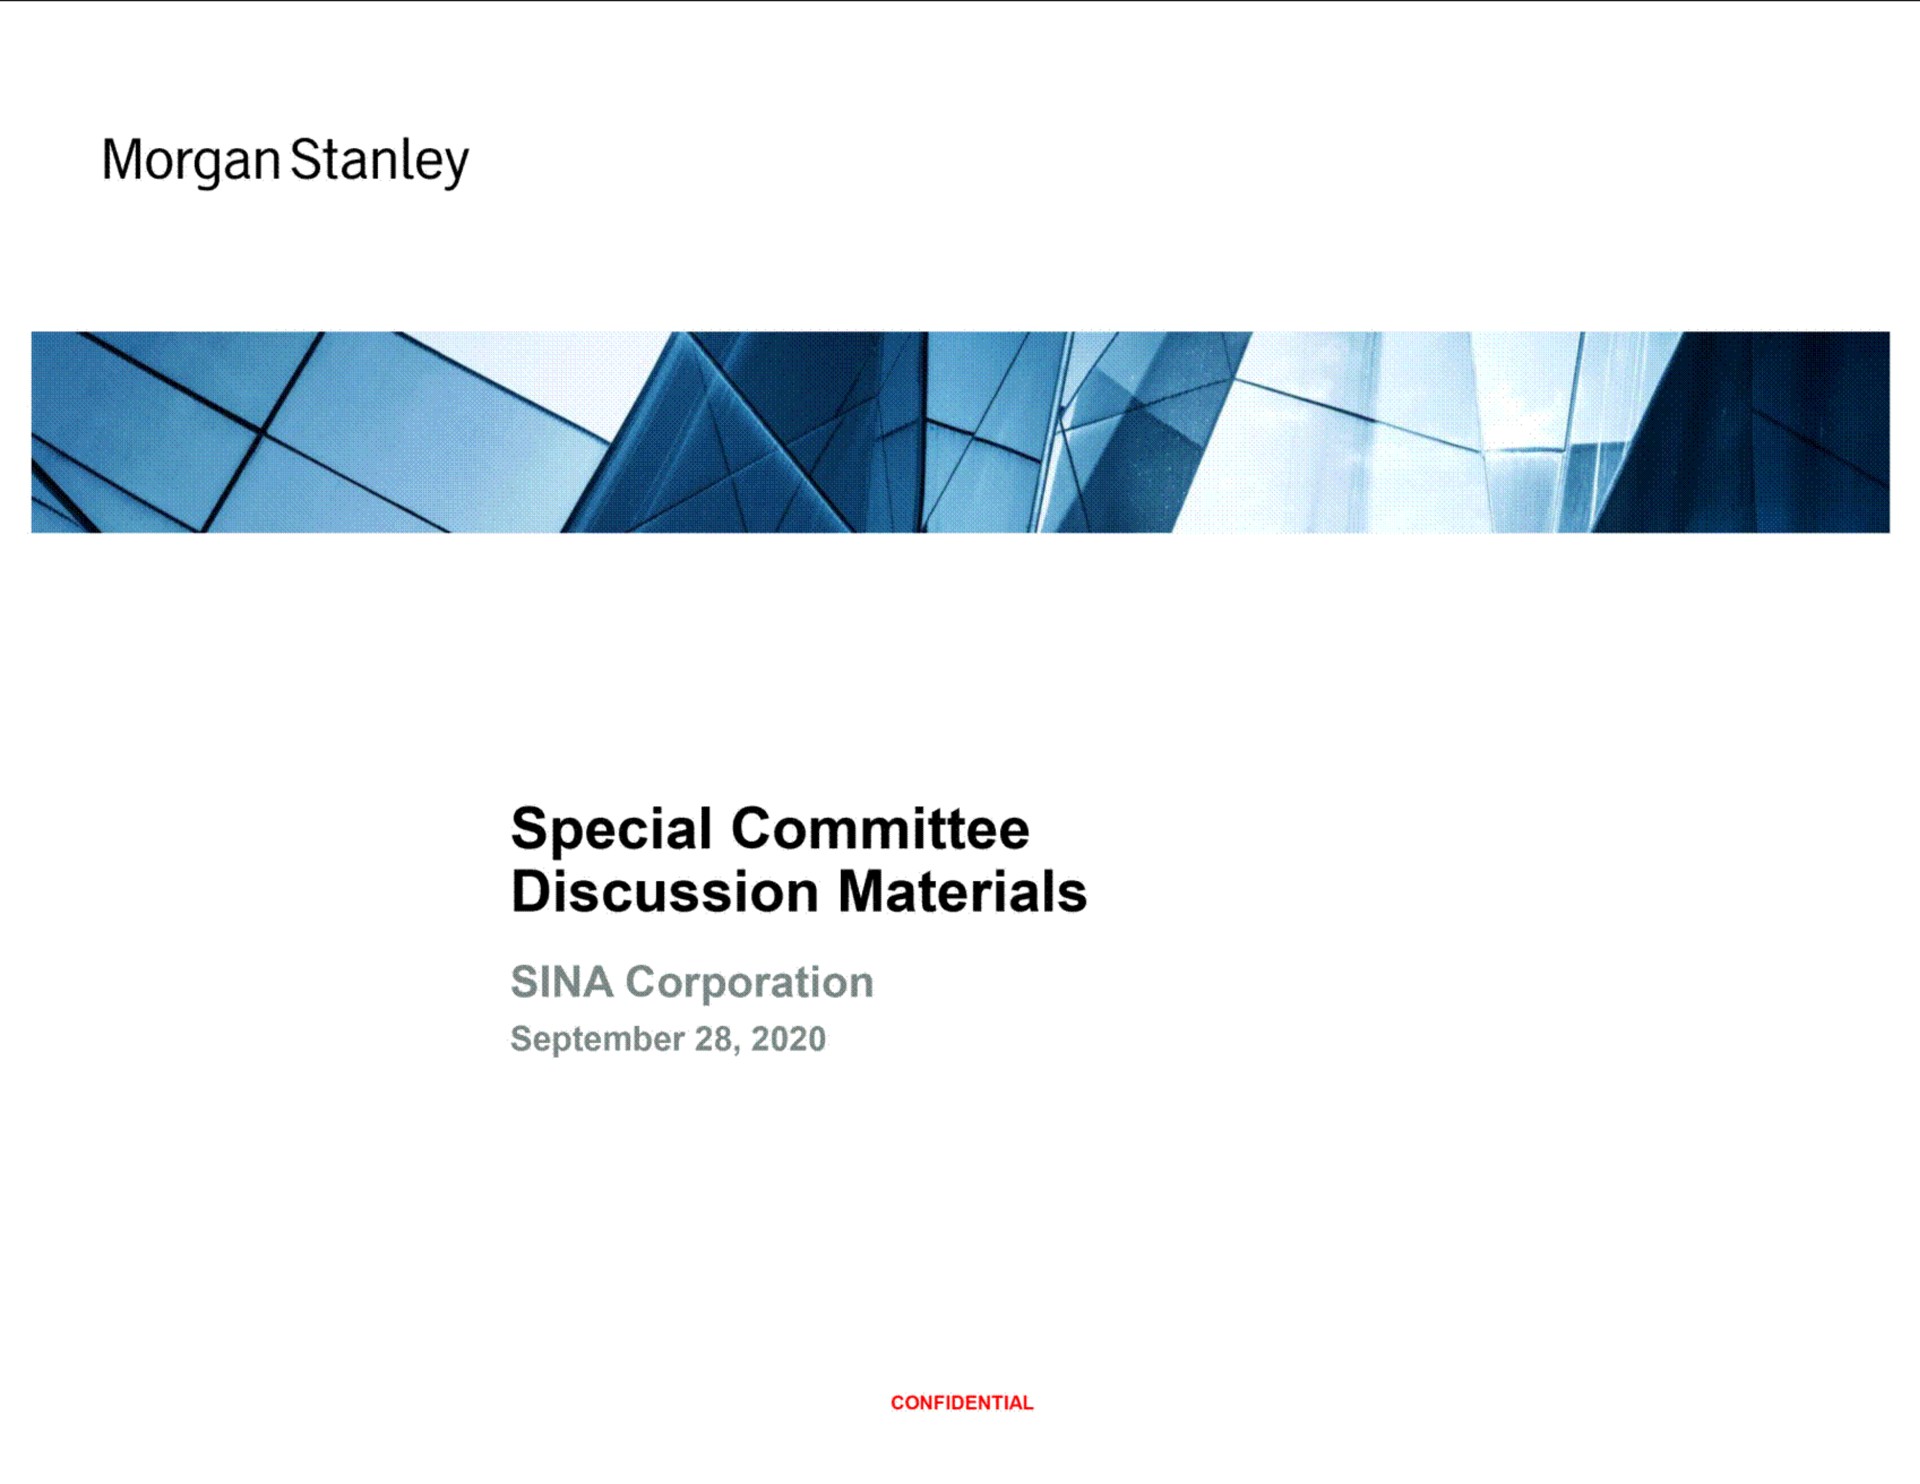 morgan special committee discussion materials sina corporation | Morgan Stanley